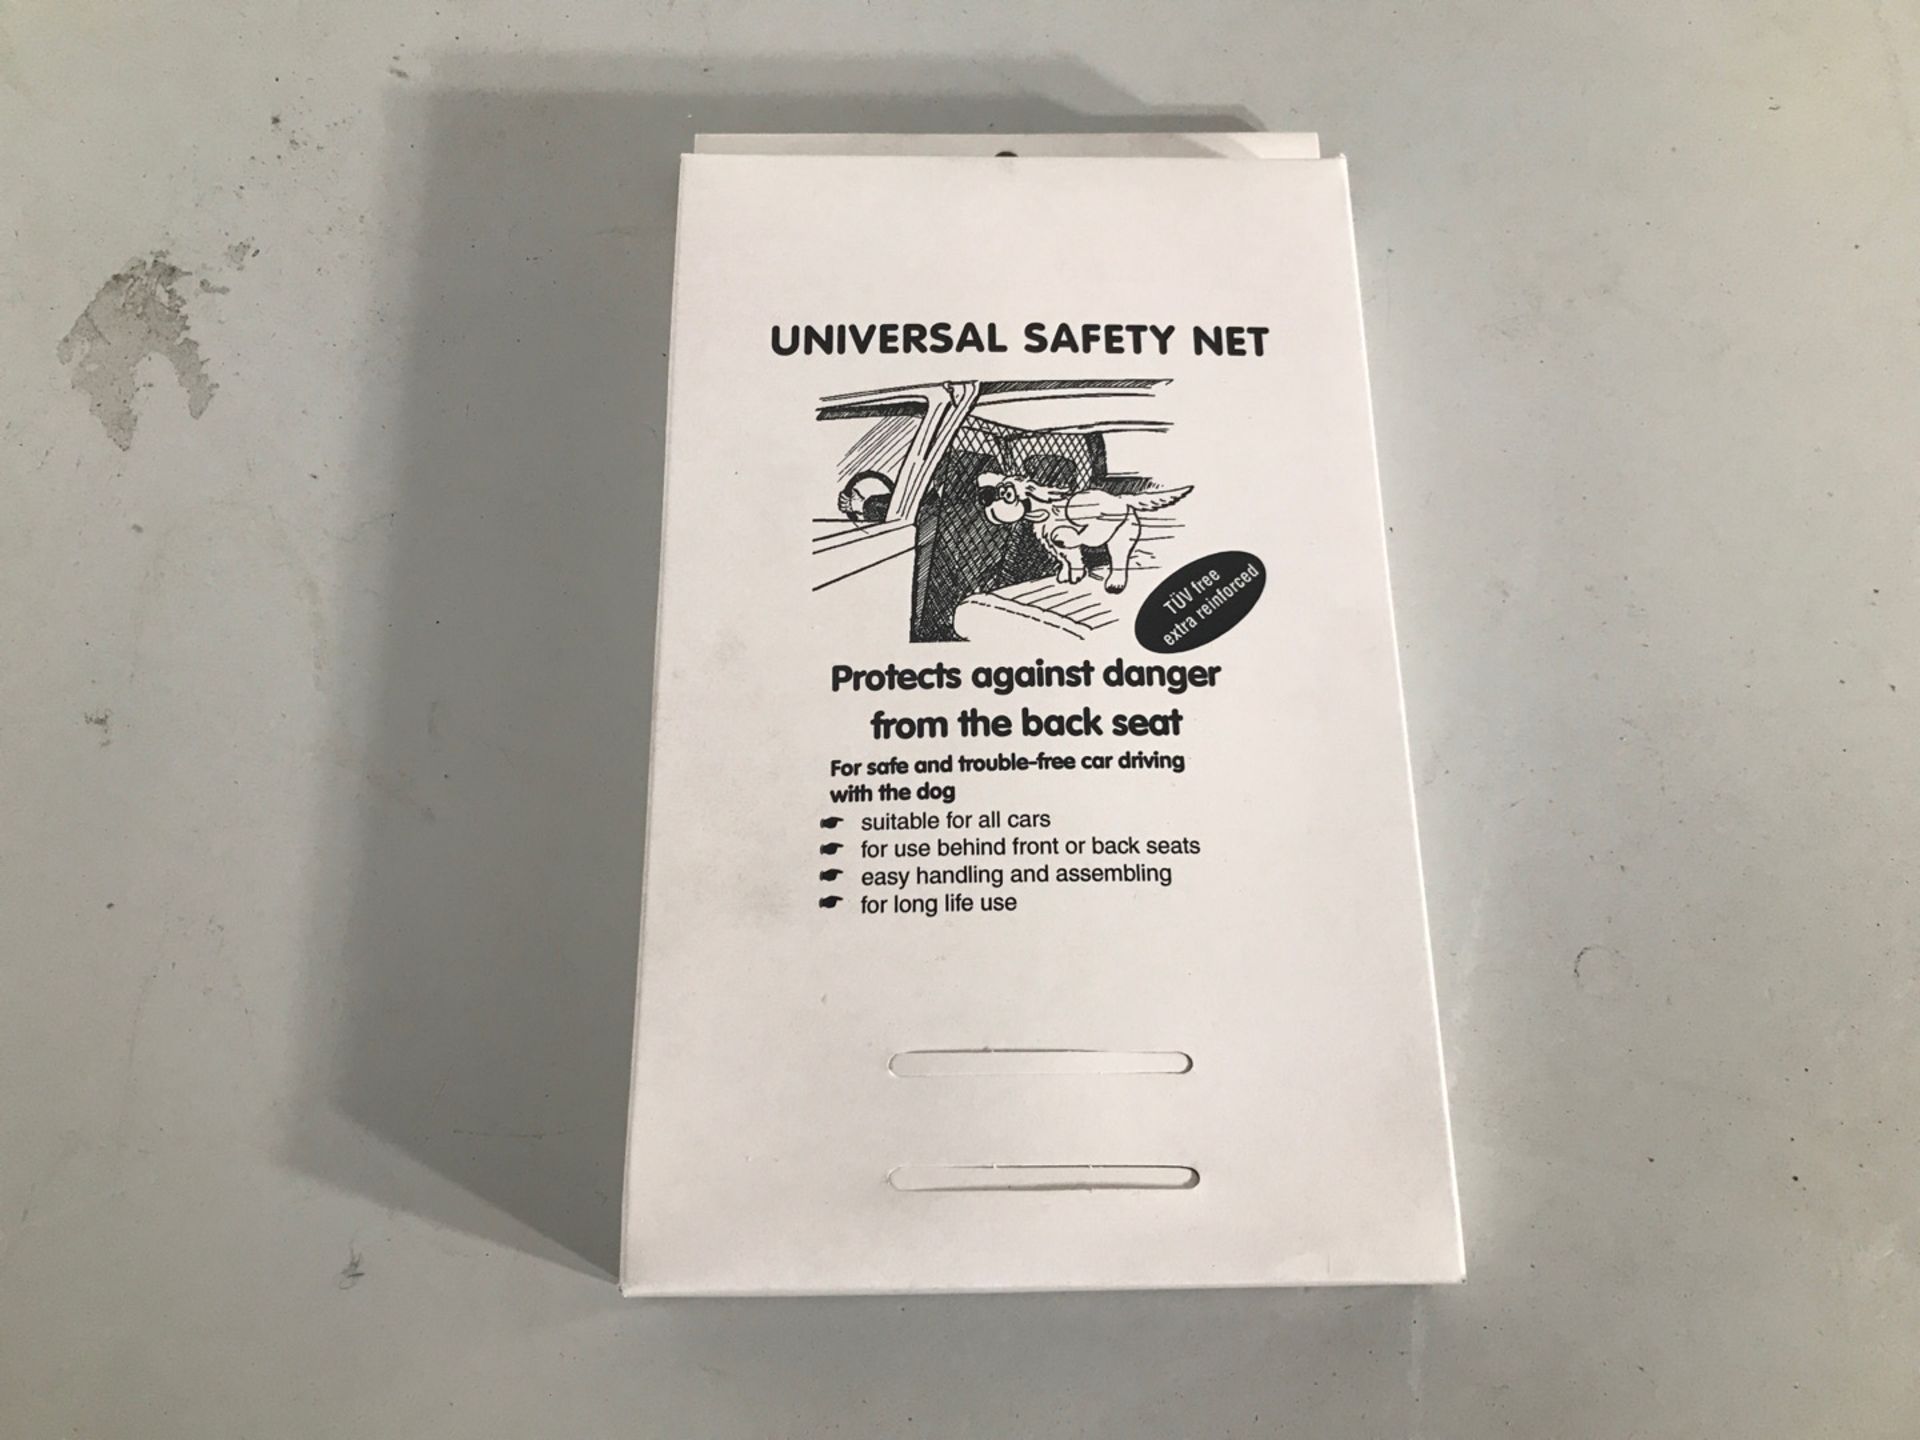 Universal Safetynet - Image 2 of 2